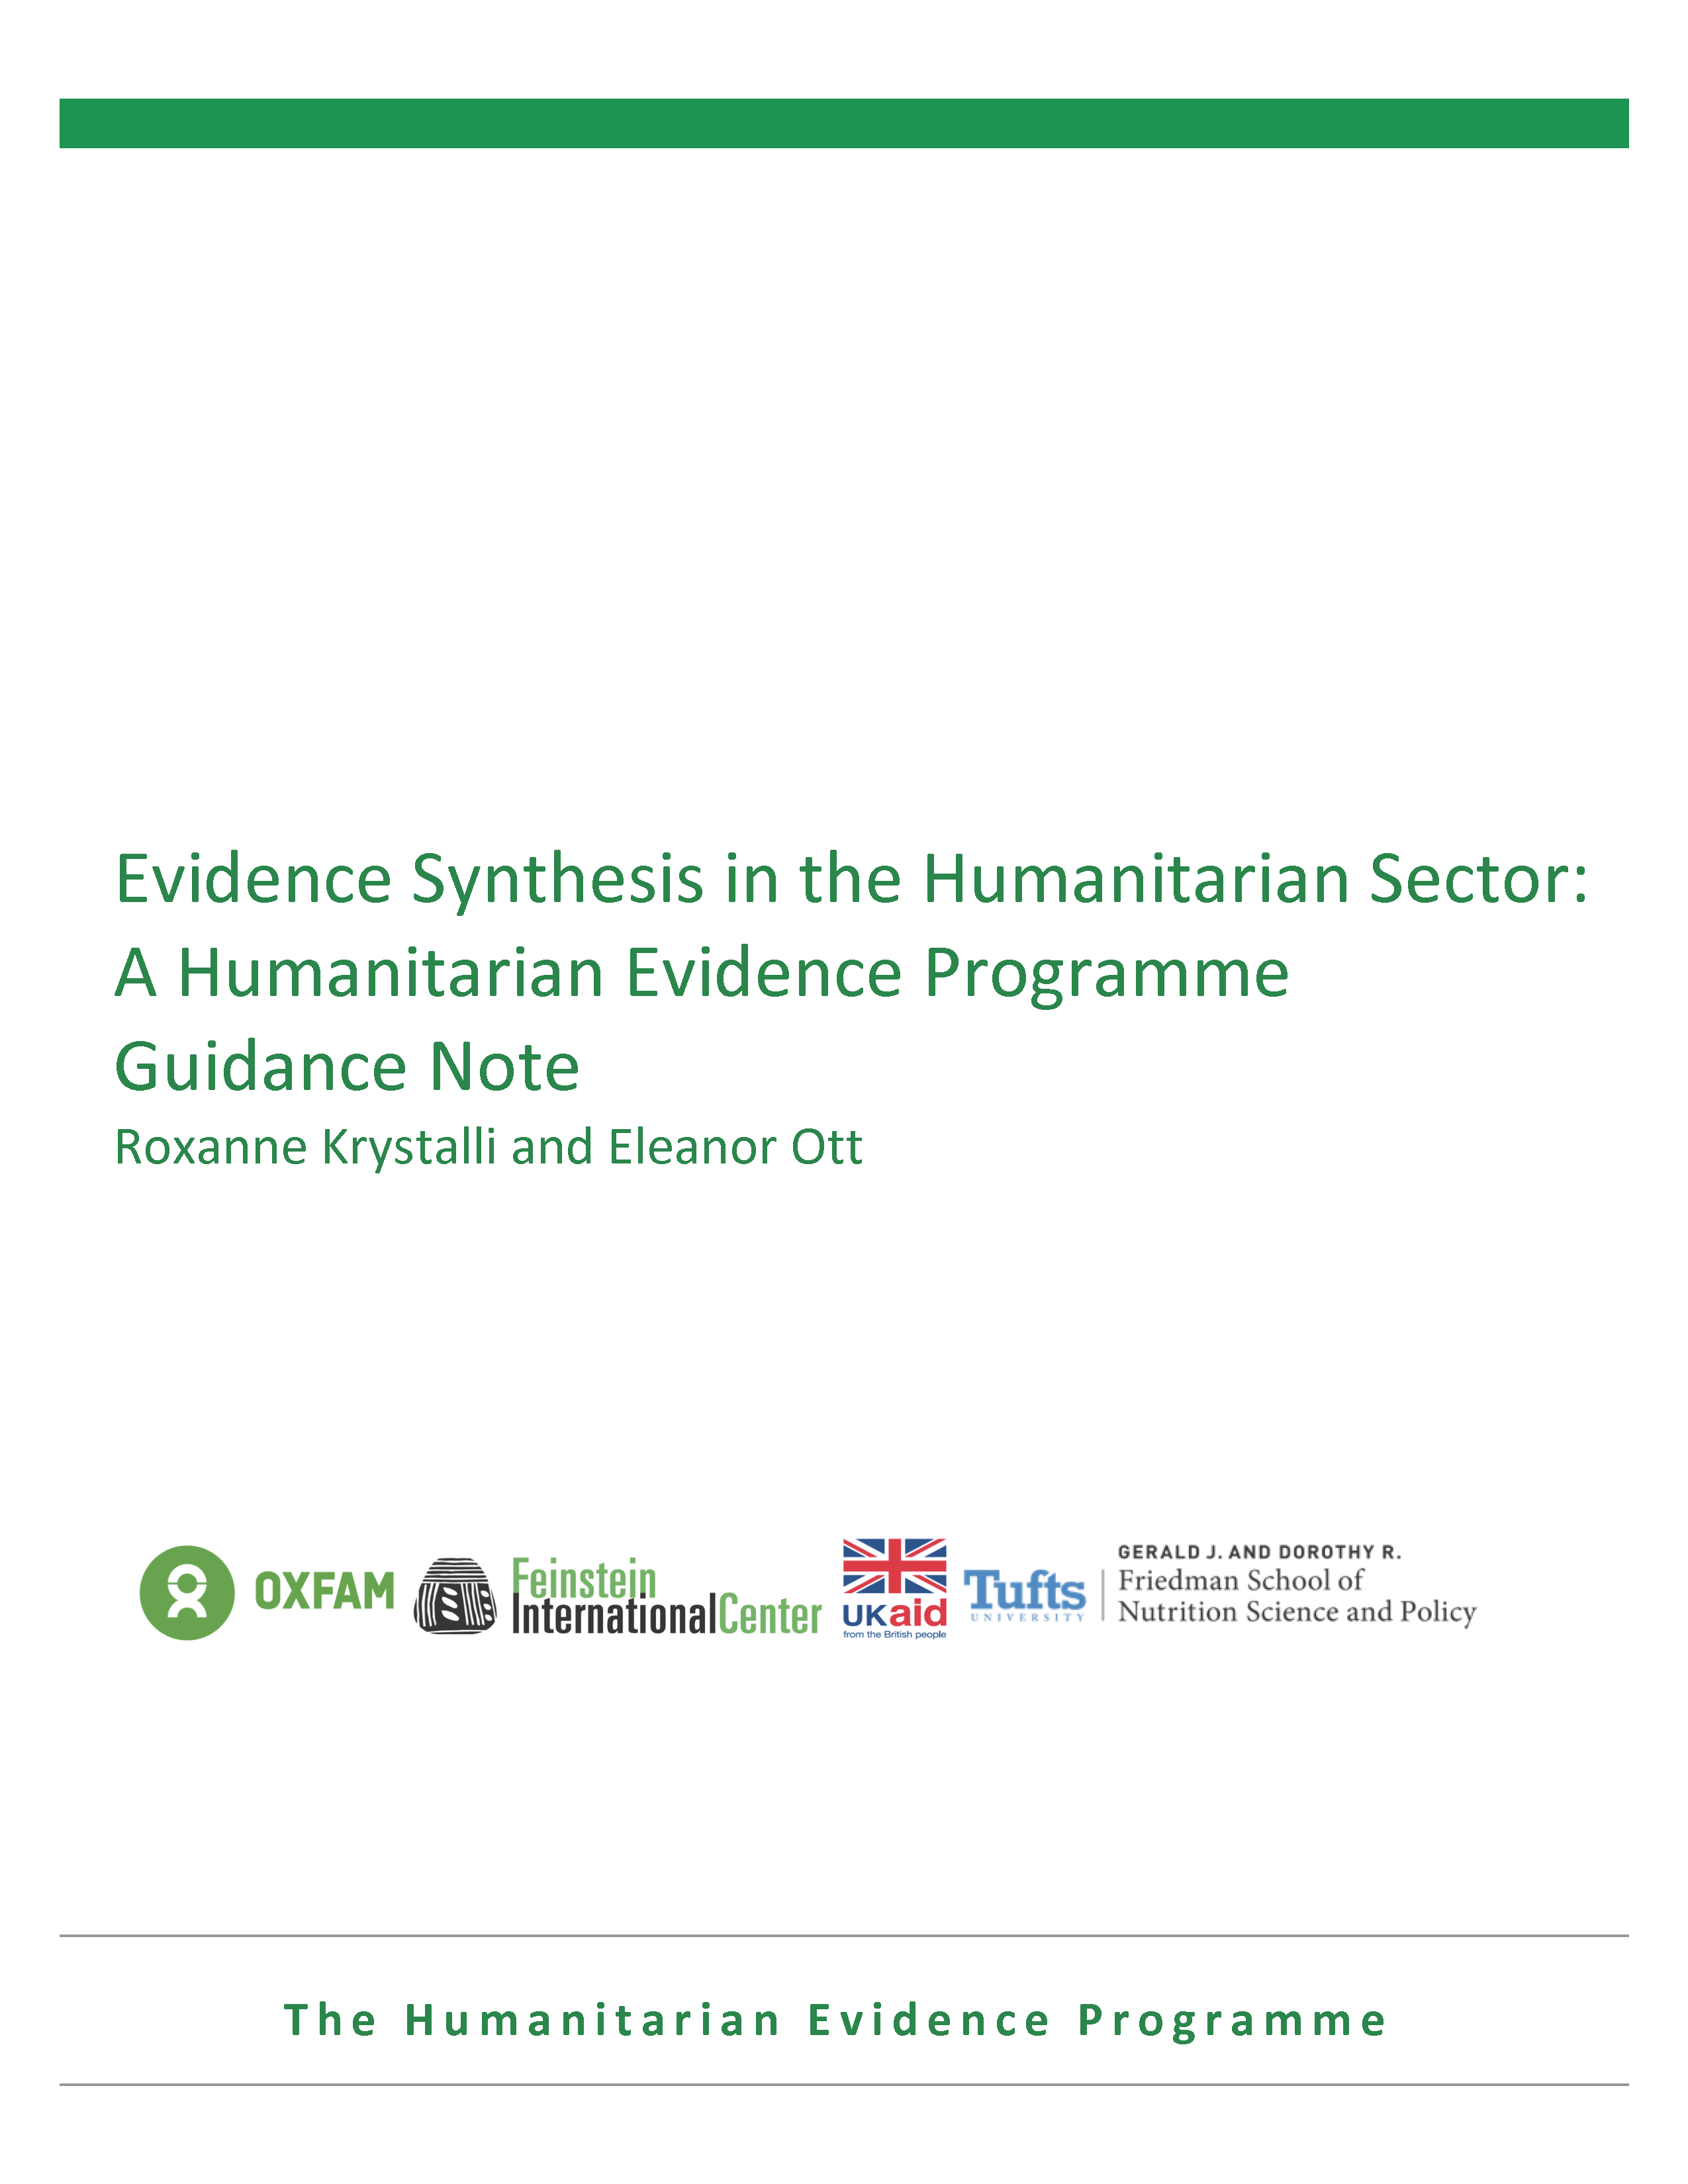 systematic evidence synthesis